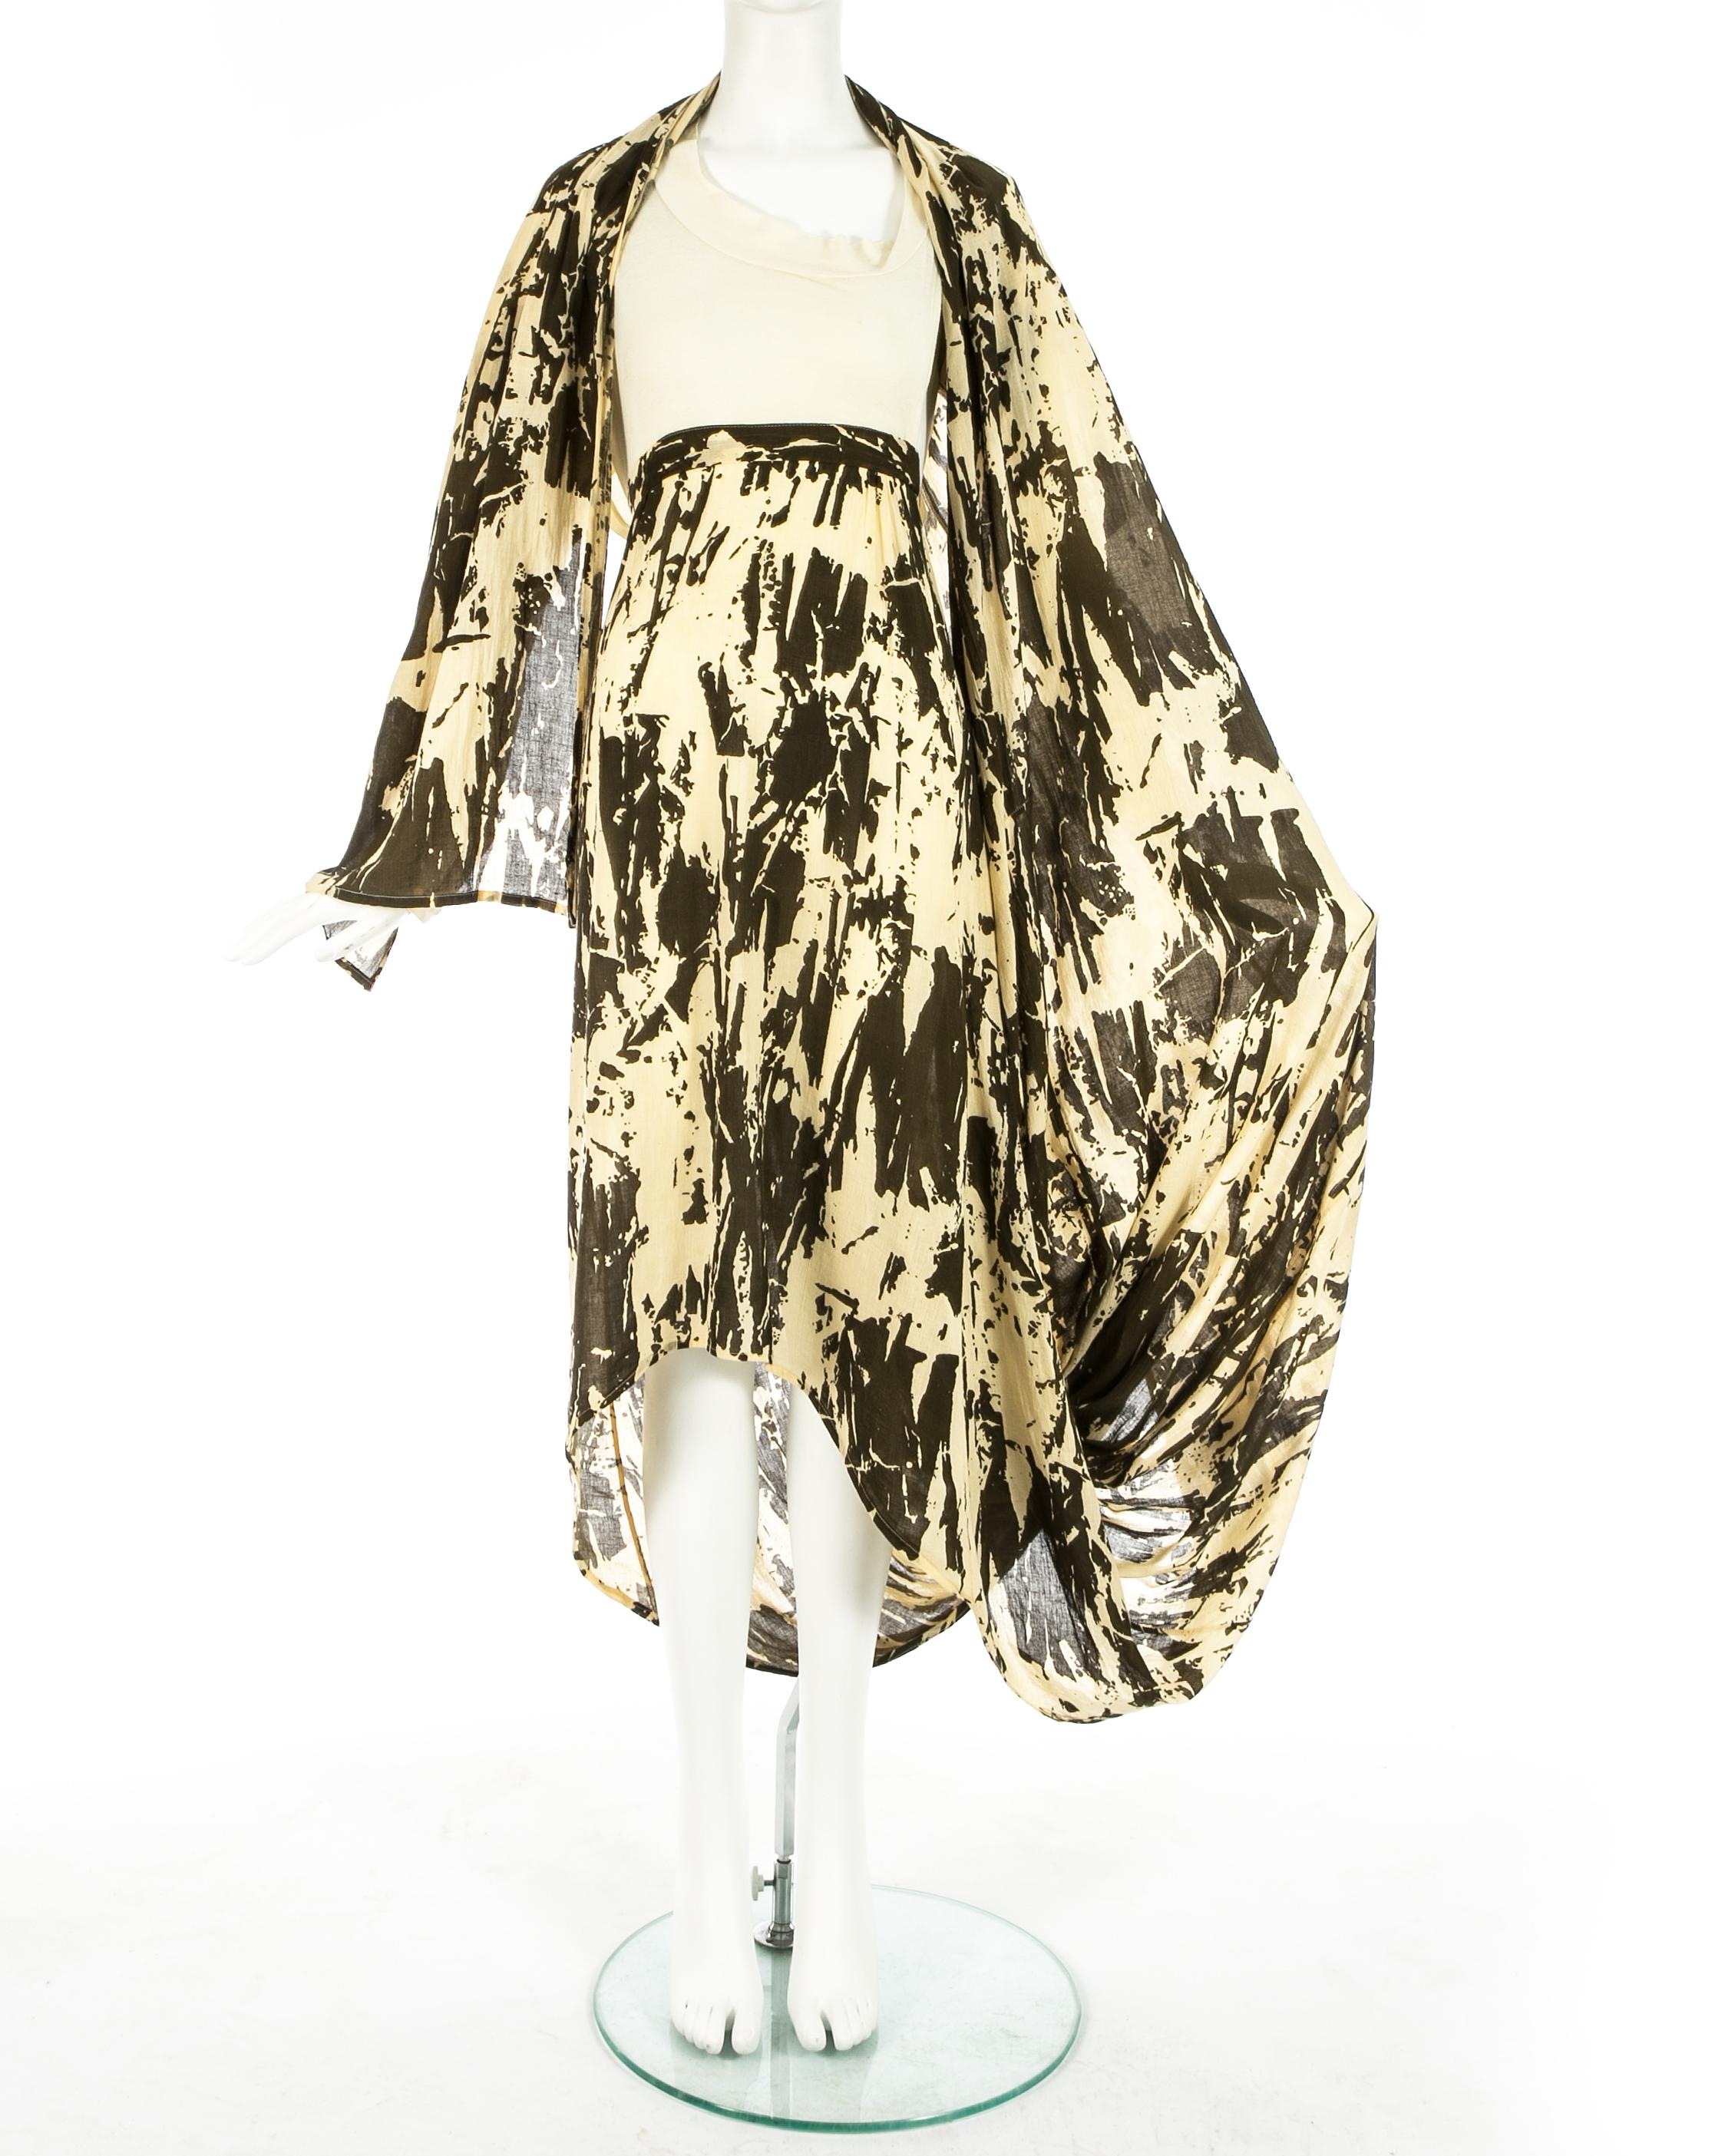 Women's Worlds End cream and brown acid wash toga dress with extra long train, S/S 1982 For Sale